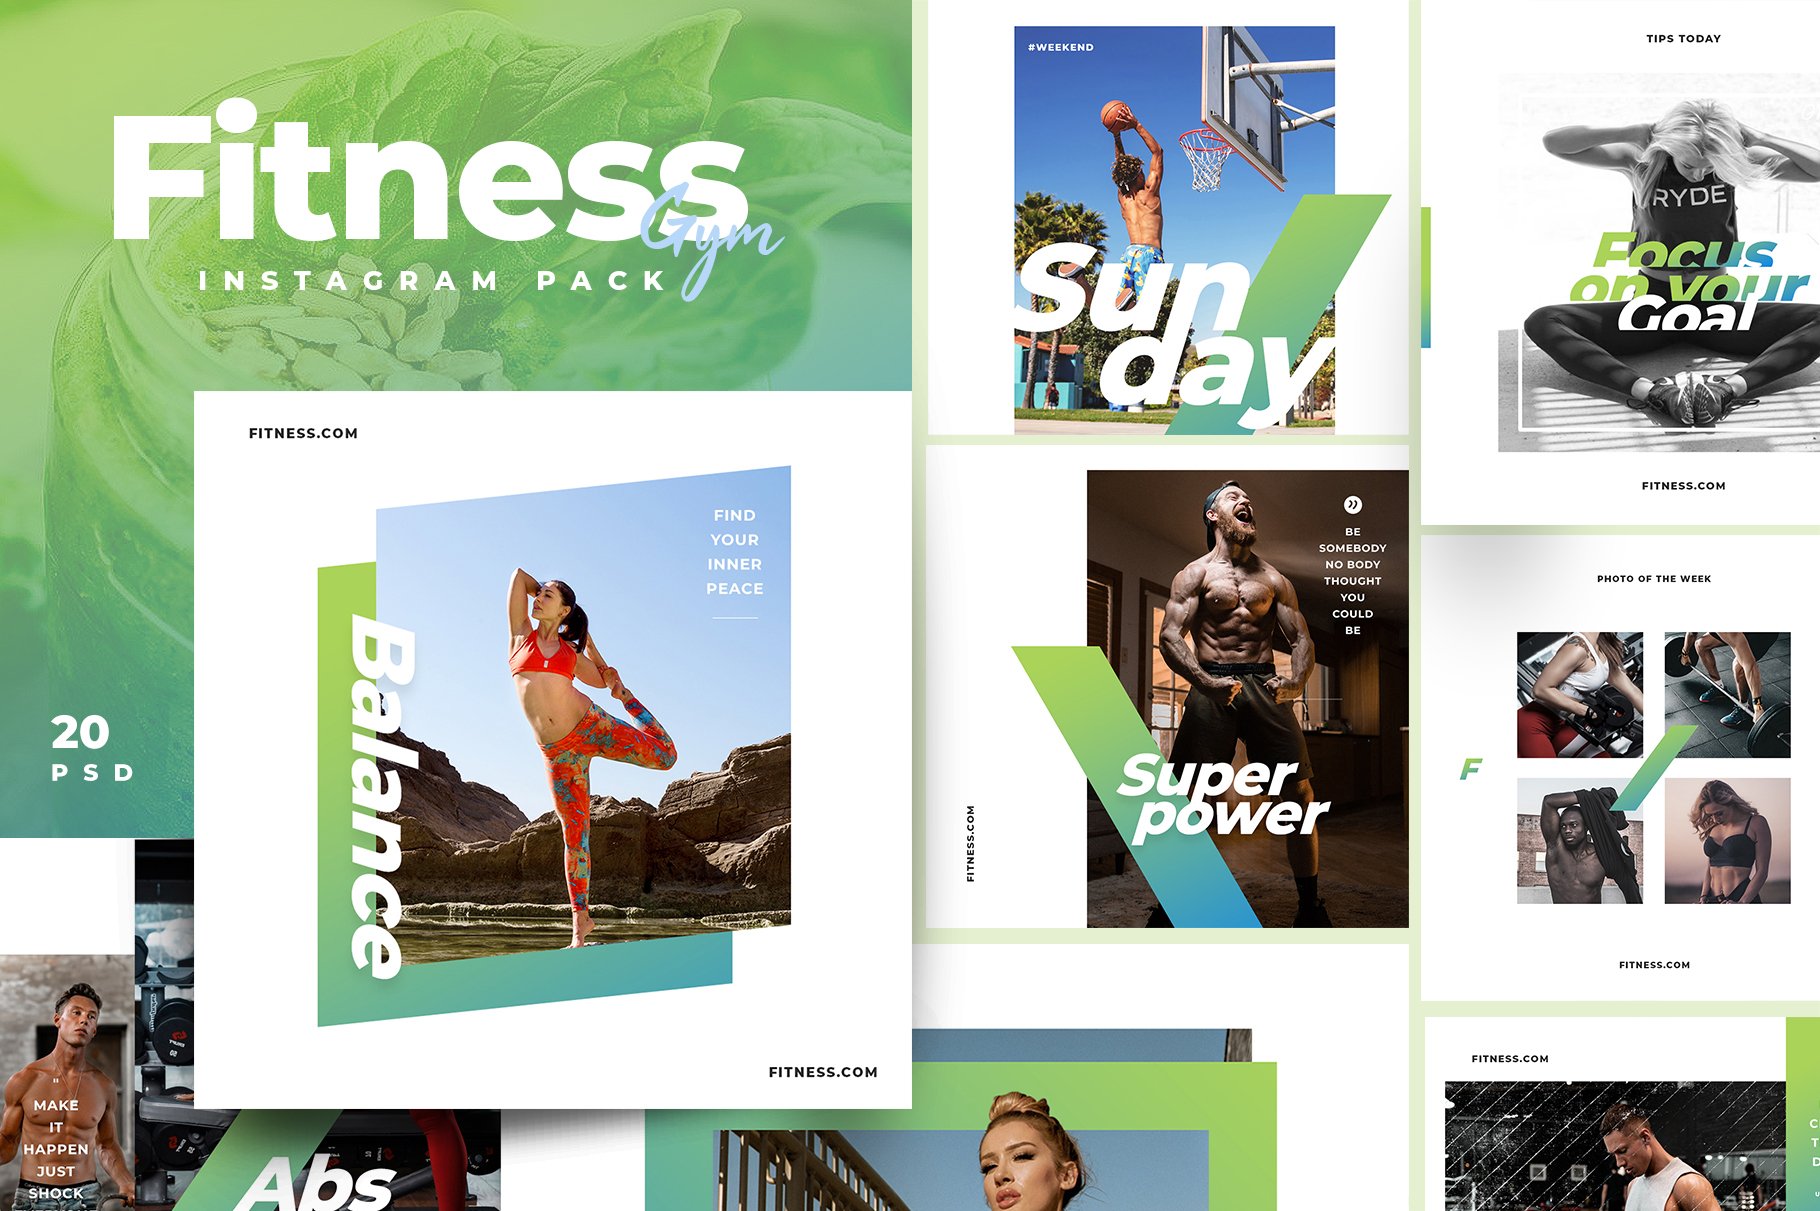 Fitness & Gym instagram pack 3.0 cover image.